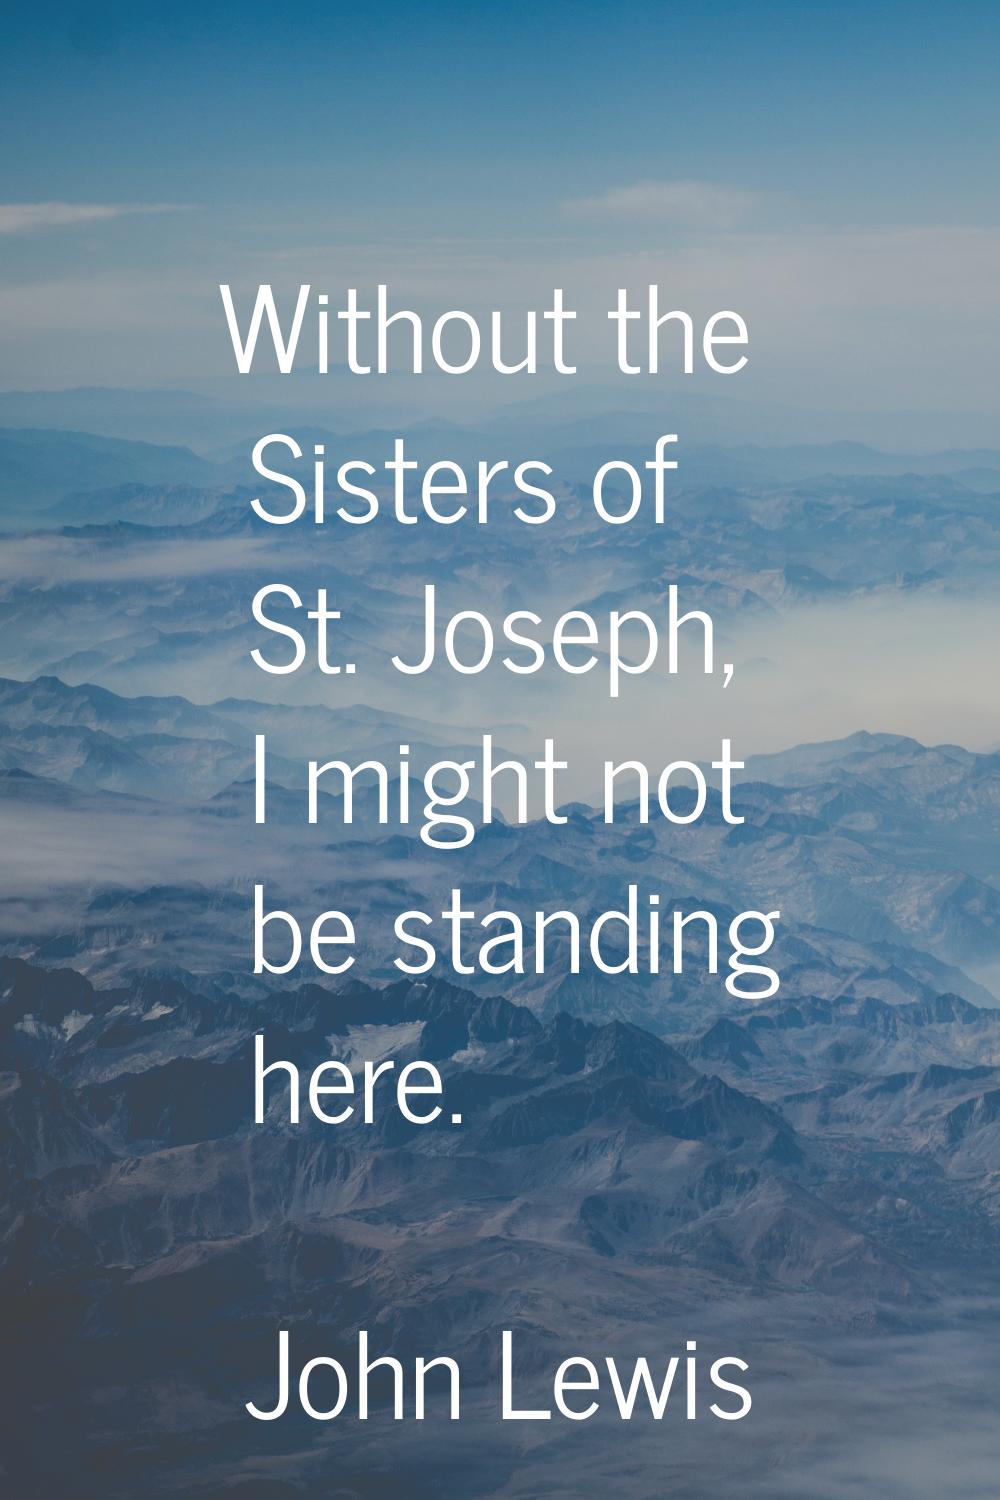 Without the Sisters of St. Joseph, I might not be standing here.